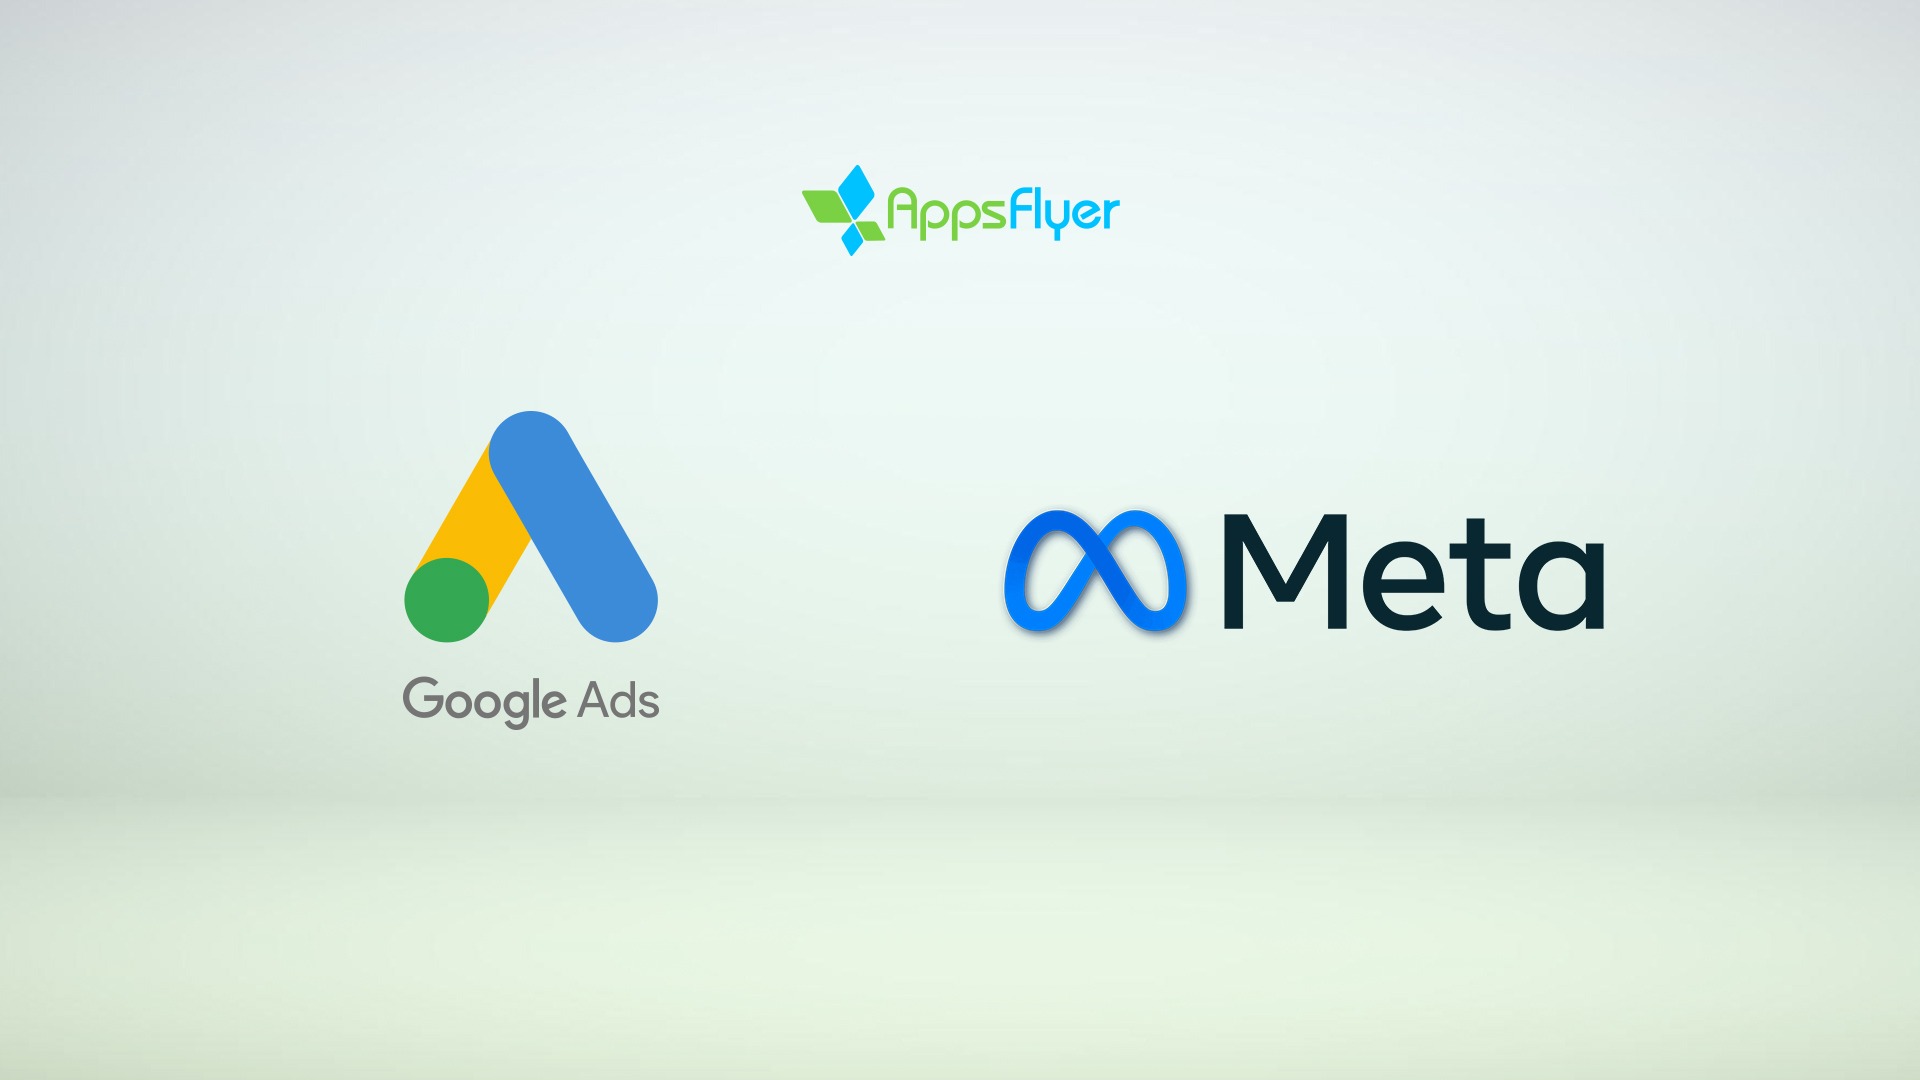 Google Ads and Meta Ads continues to dominate remarketing index despite Apple’s privacy changes: AppsFlyer Performance Index 15